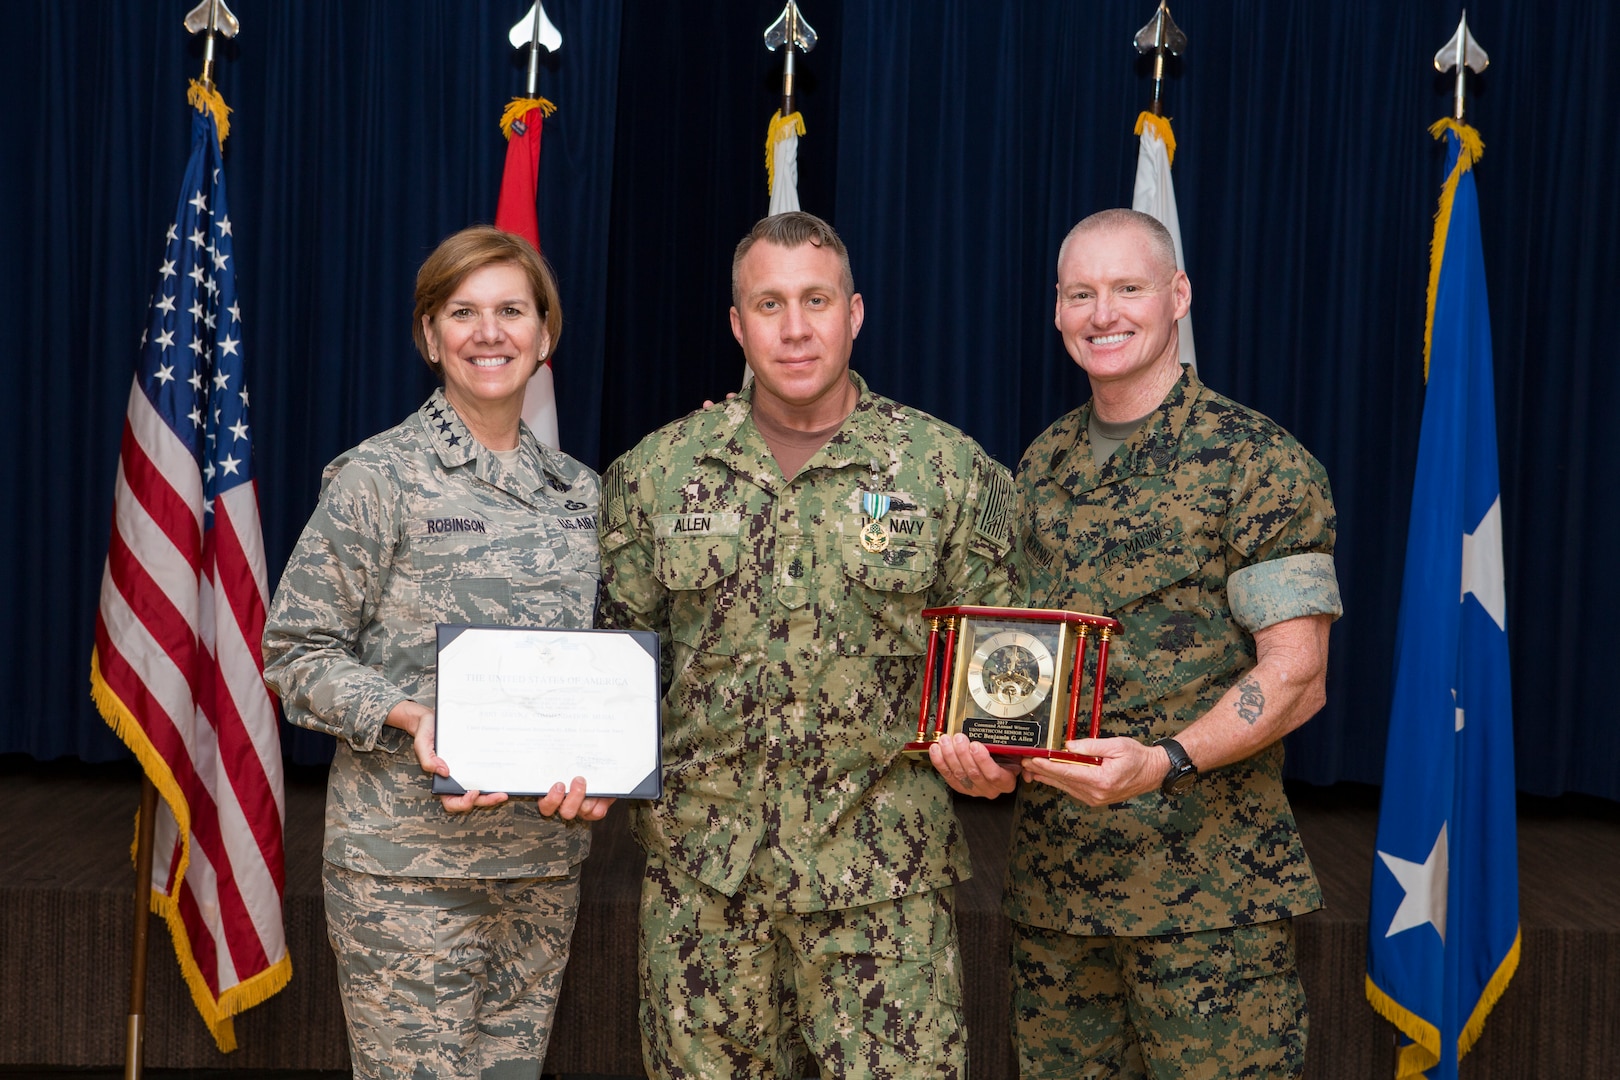 Chief Petty Officer Benjamin Allen, a senior non-commissioned officer at Joint Task Force Civil Support (JTF-CS), receives the Senior Non-Commissioned Officer (NCO) of the Year award from Air Force Gen. Lori Robinson and Marine Sgt. Maj. Paul McKenna at Peterson Air Force Base, Colo. Apr 4, 2018. To win this award, Allen competed against Senior NCOs from eight other units that fall under U.S, Northern Command. (Official DoD photo by Tech. Sgt. Joe Laws/released)